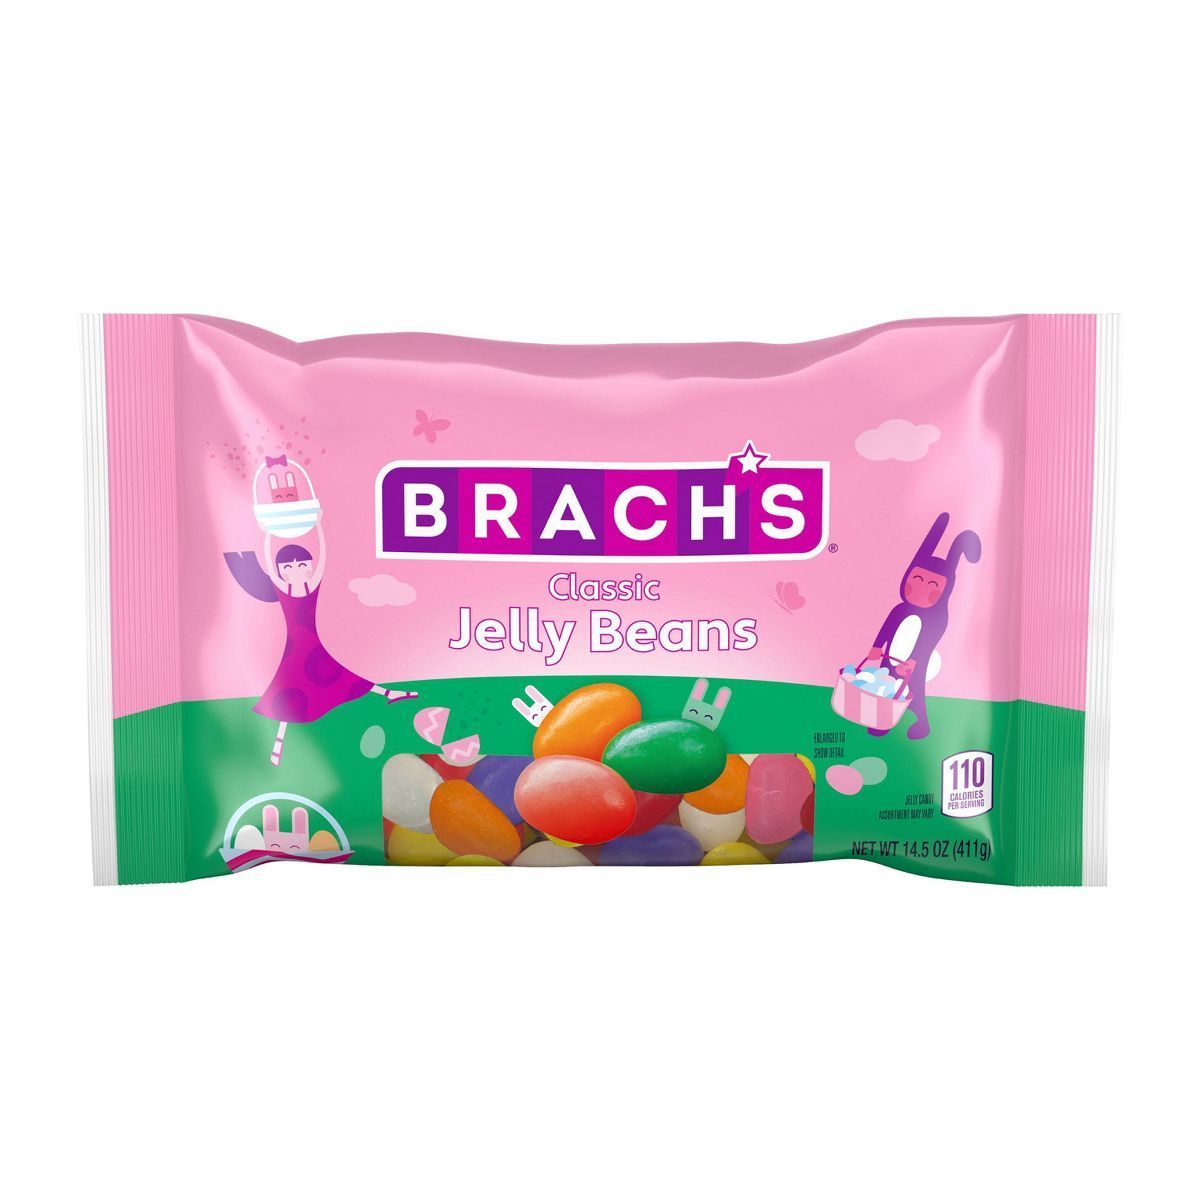 Brach's Easter Classic Jelly Beans - 14.5oz | Target